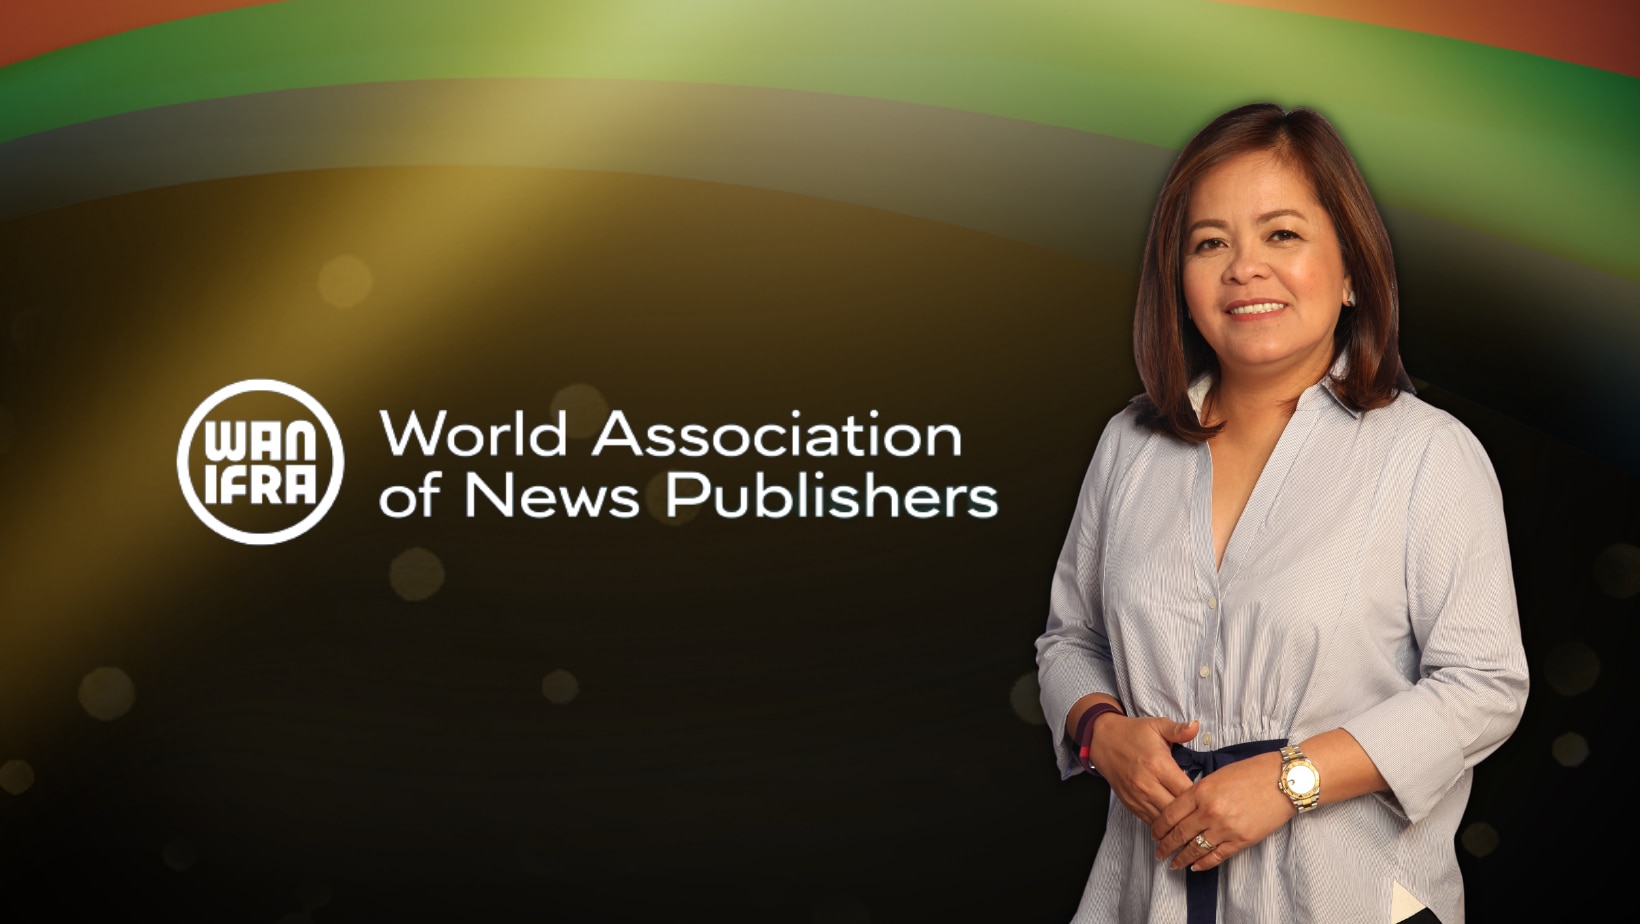 ABS-CBN News Chief Ging Reyes is 2022 Southeast Asia Laureate for WAN-IFRA Women in News Editorial Leadership